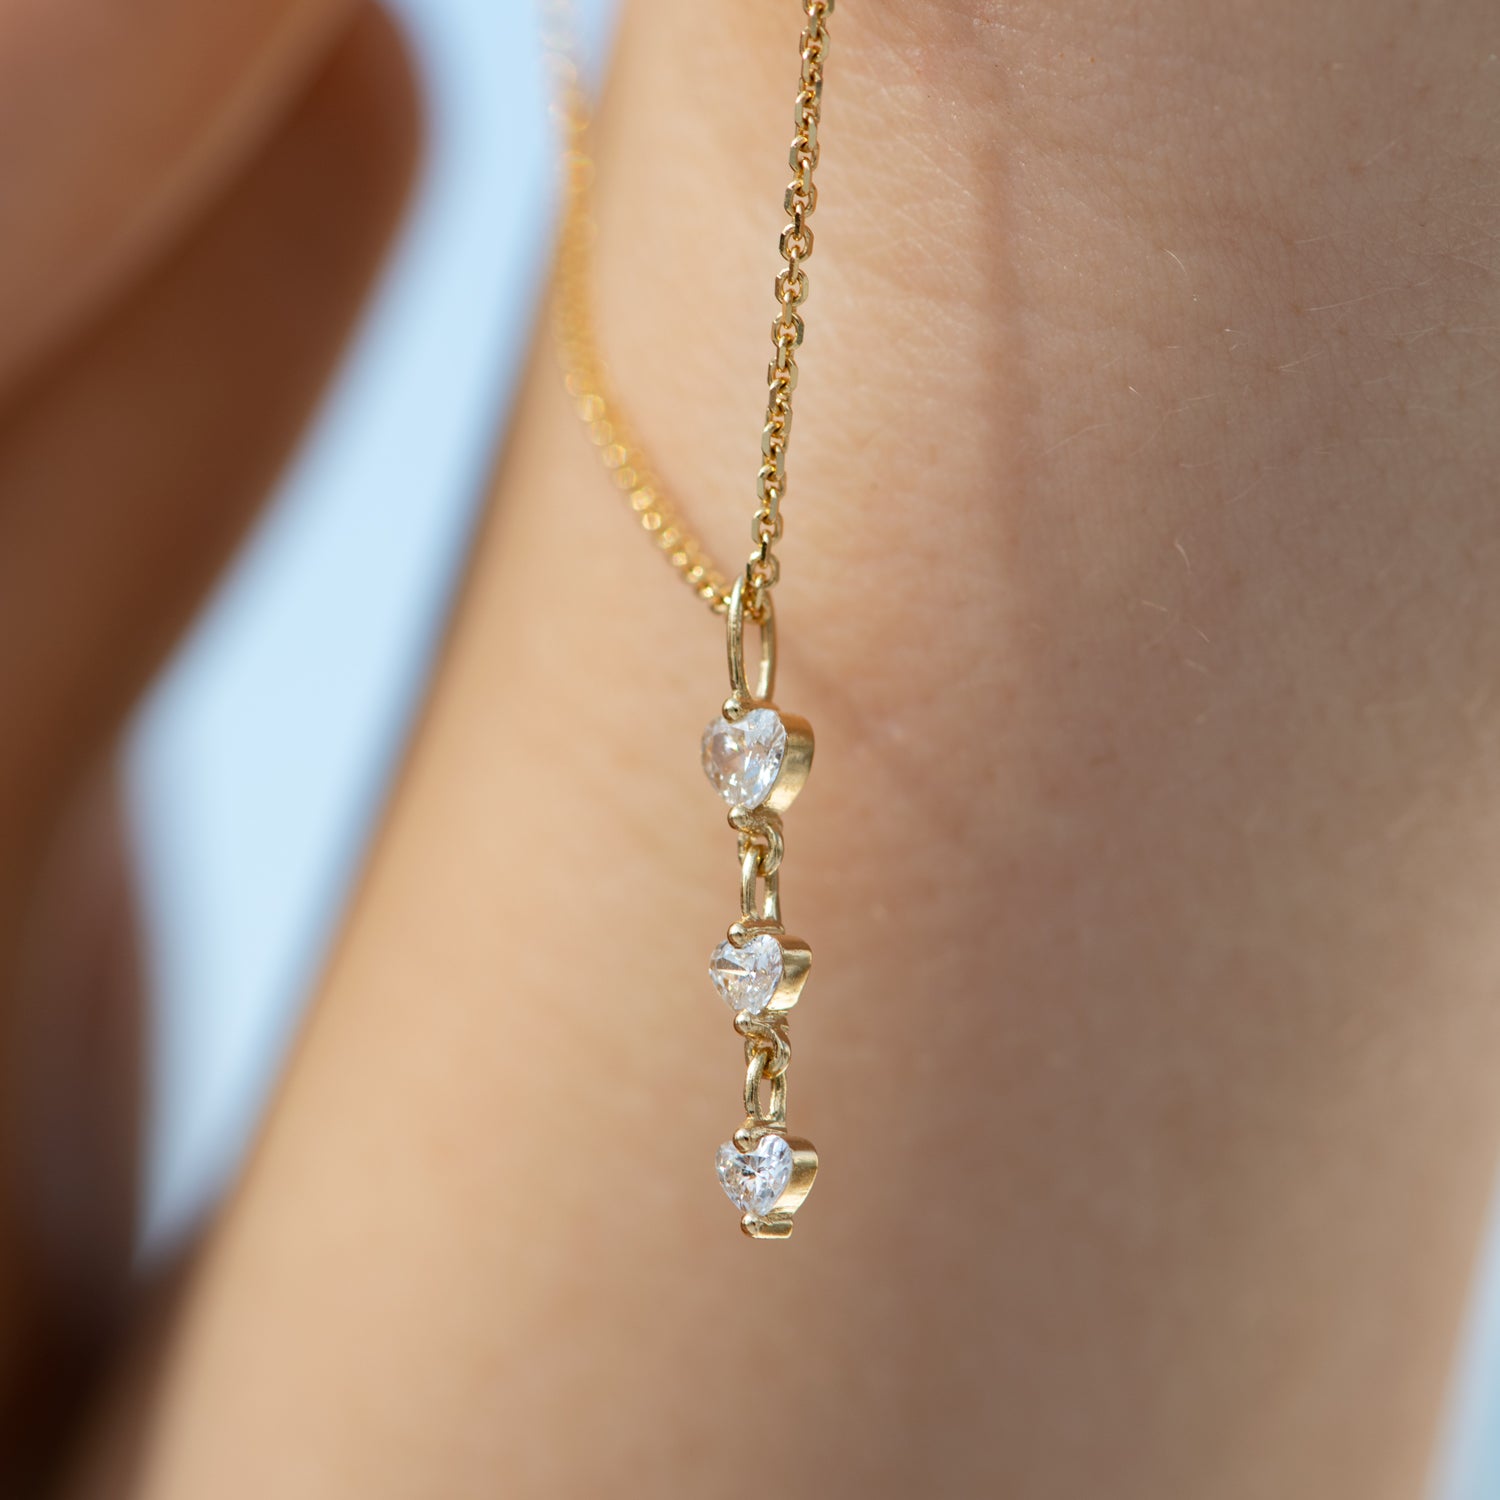 Diamond Necklace with a Tiny Heart Chain Pendant – ARTEMER